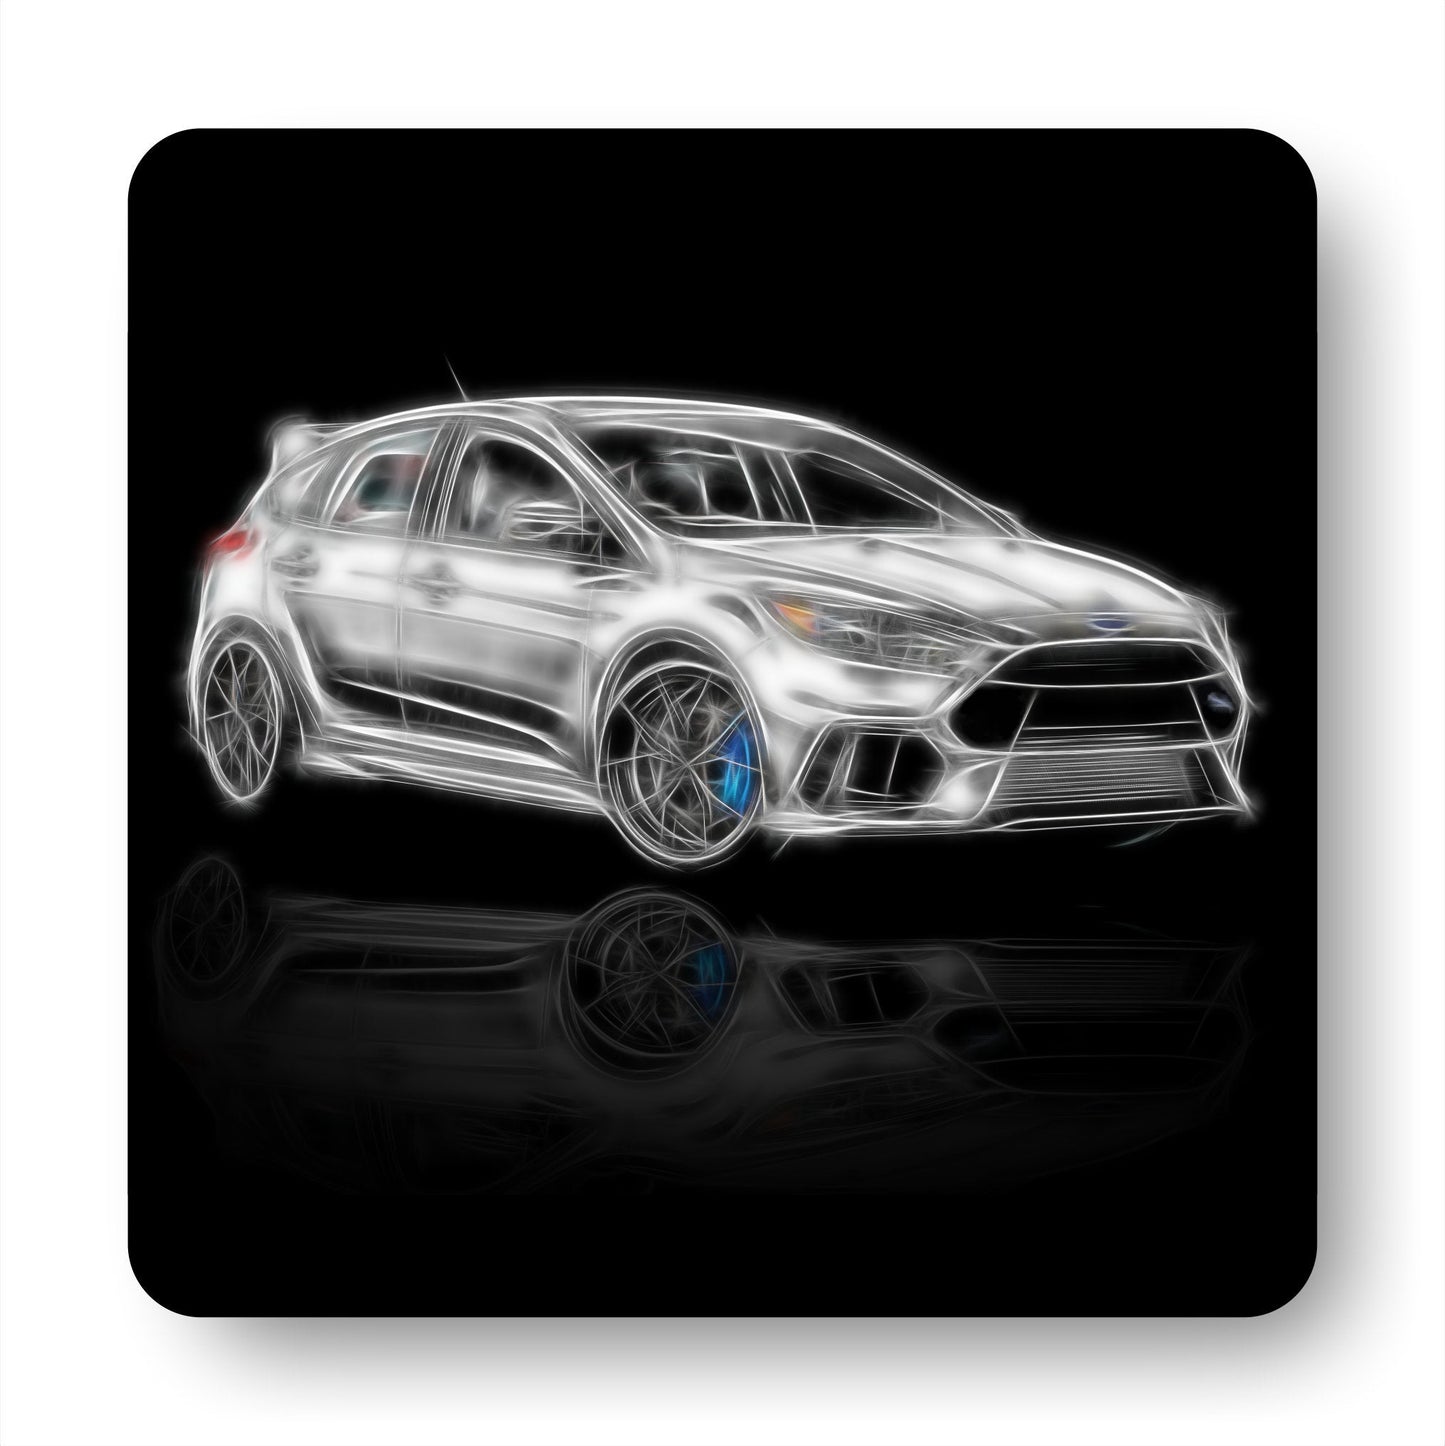 Ford Focus RS Coasters with Stunning Fractal Art Design. Various colours blue, green, orange, black, grey, and white available.